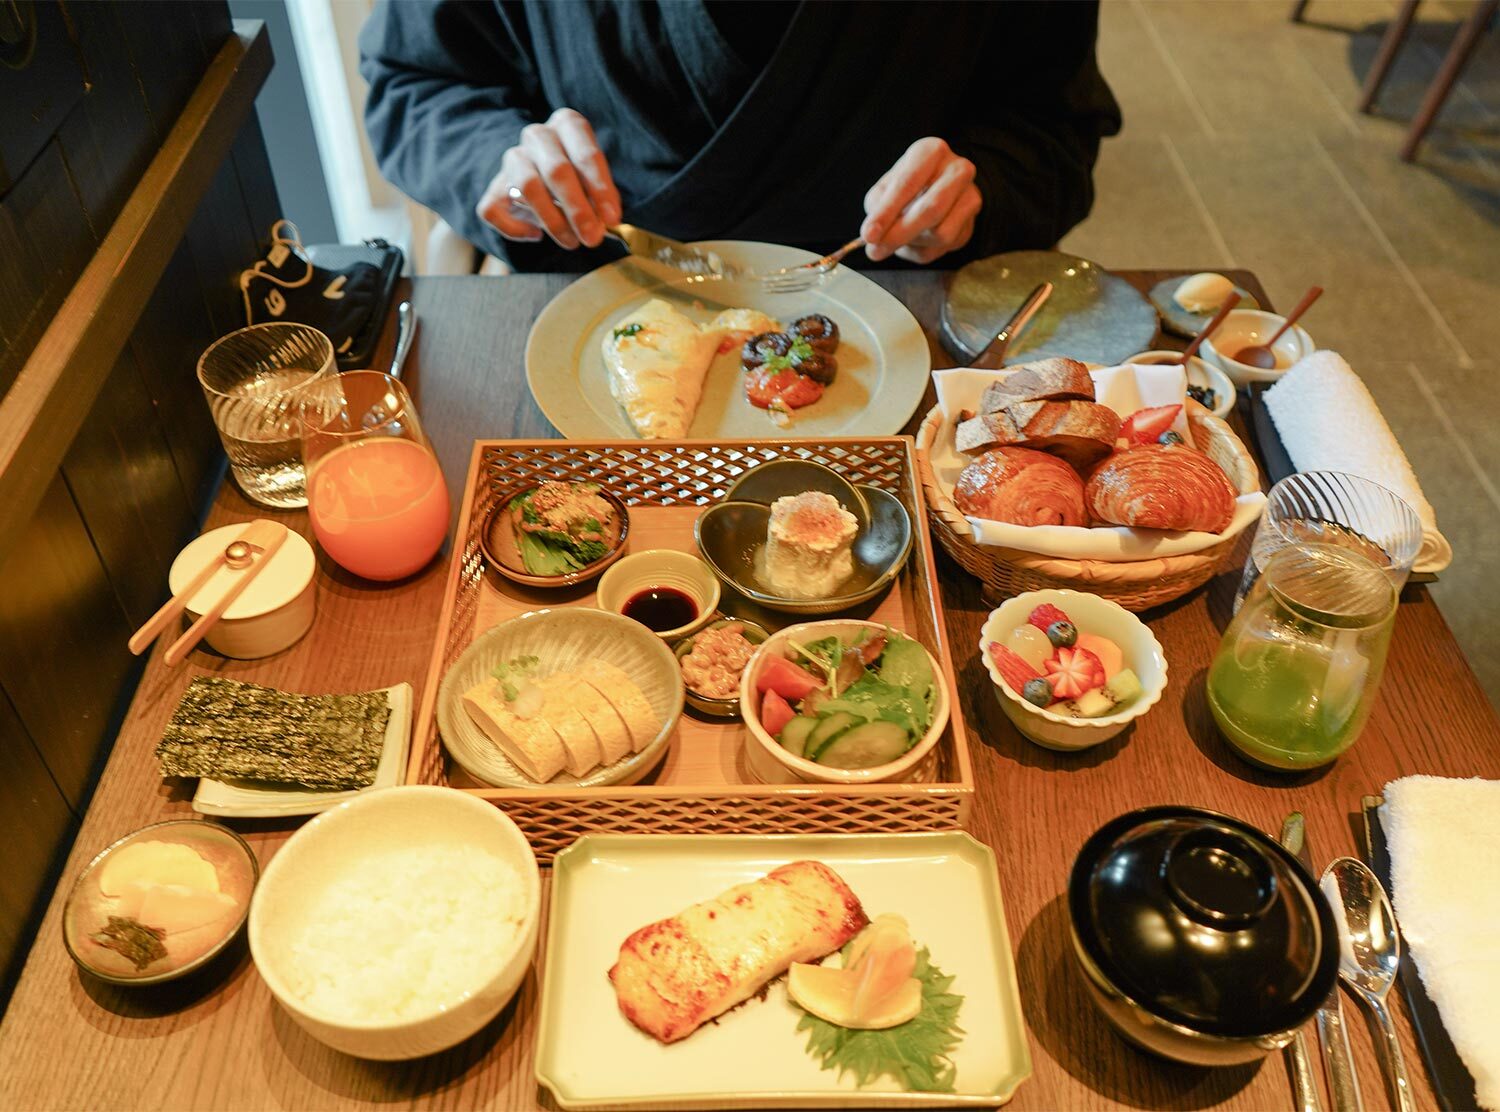 The Shinmonzen  Breakfast was a mouthwatering array of traditional and umami flavors. Each dish is prepared with the freshest  ingredients and plated with precision